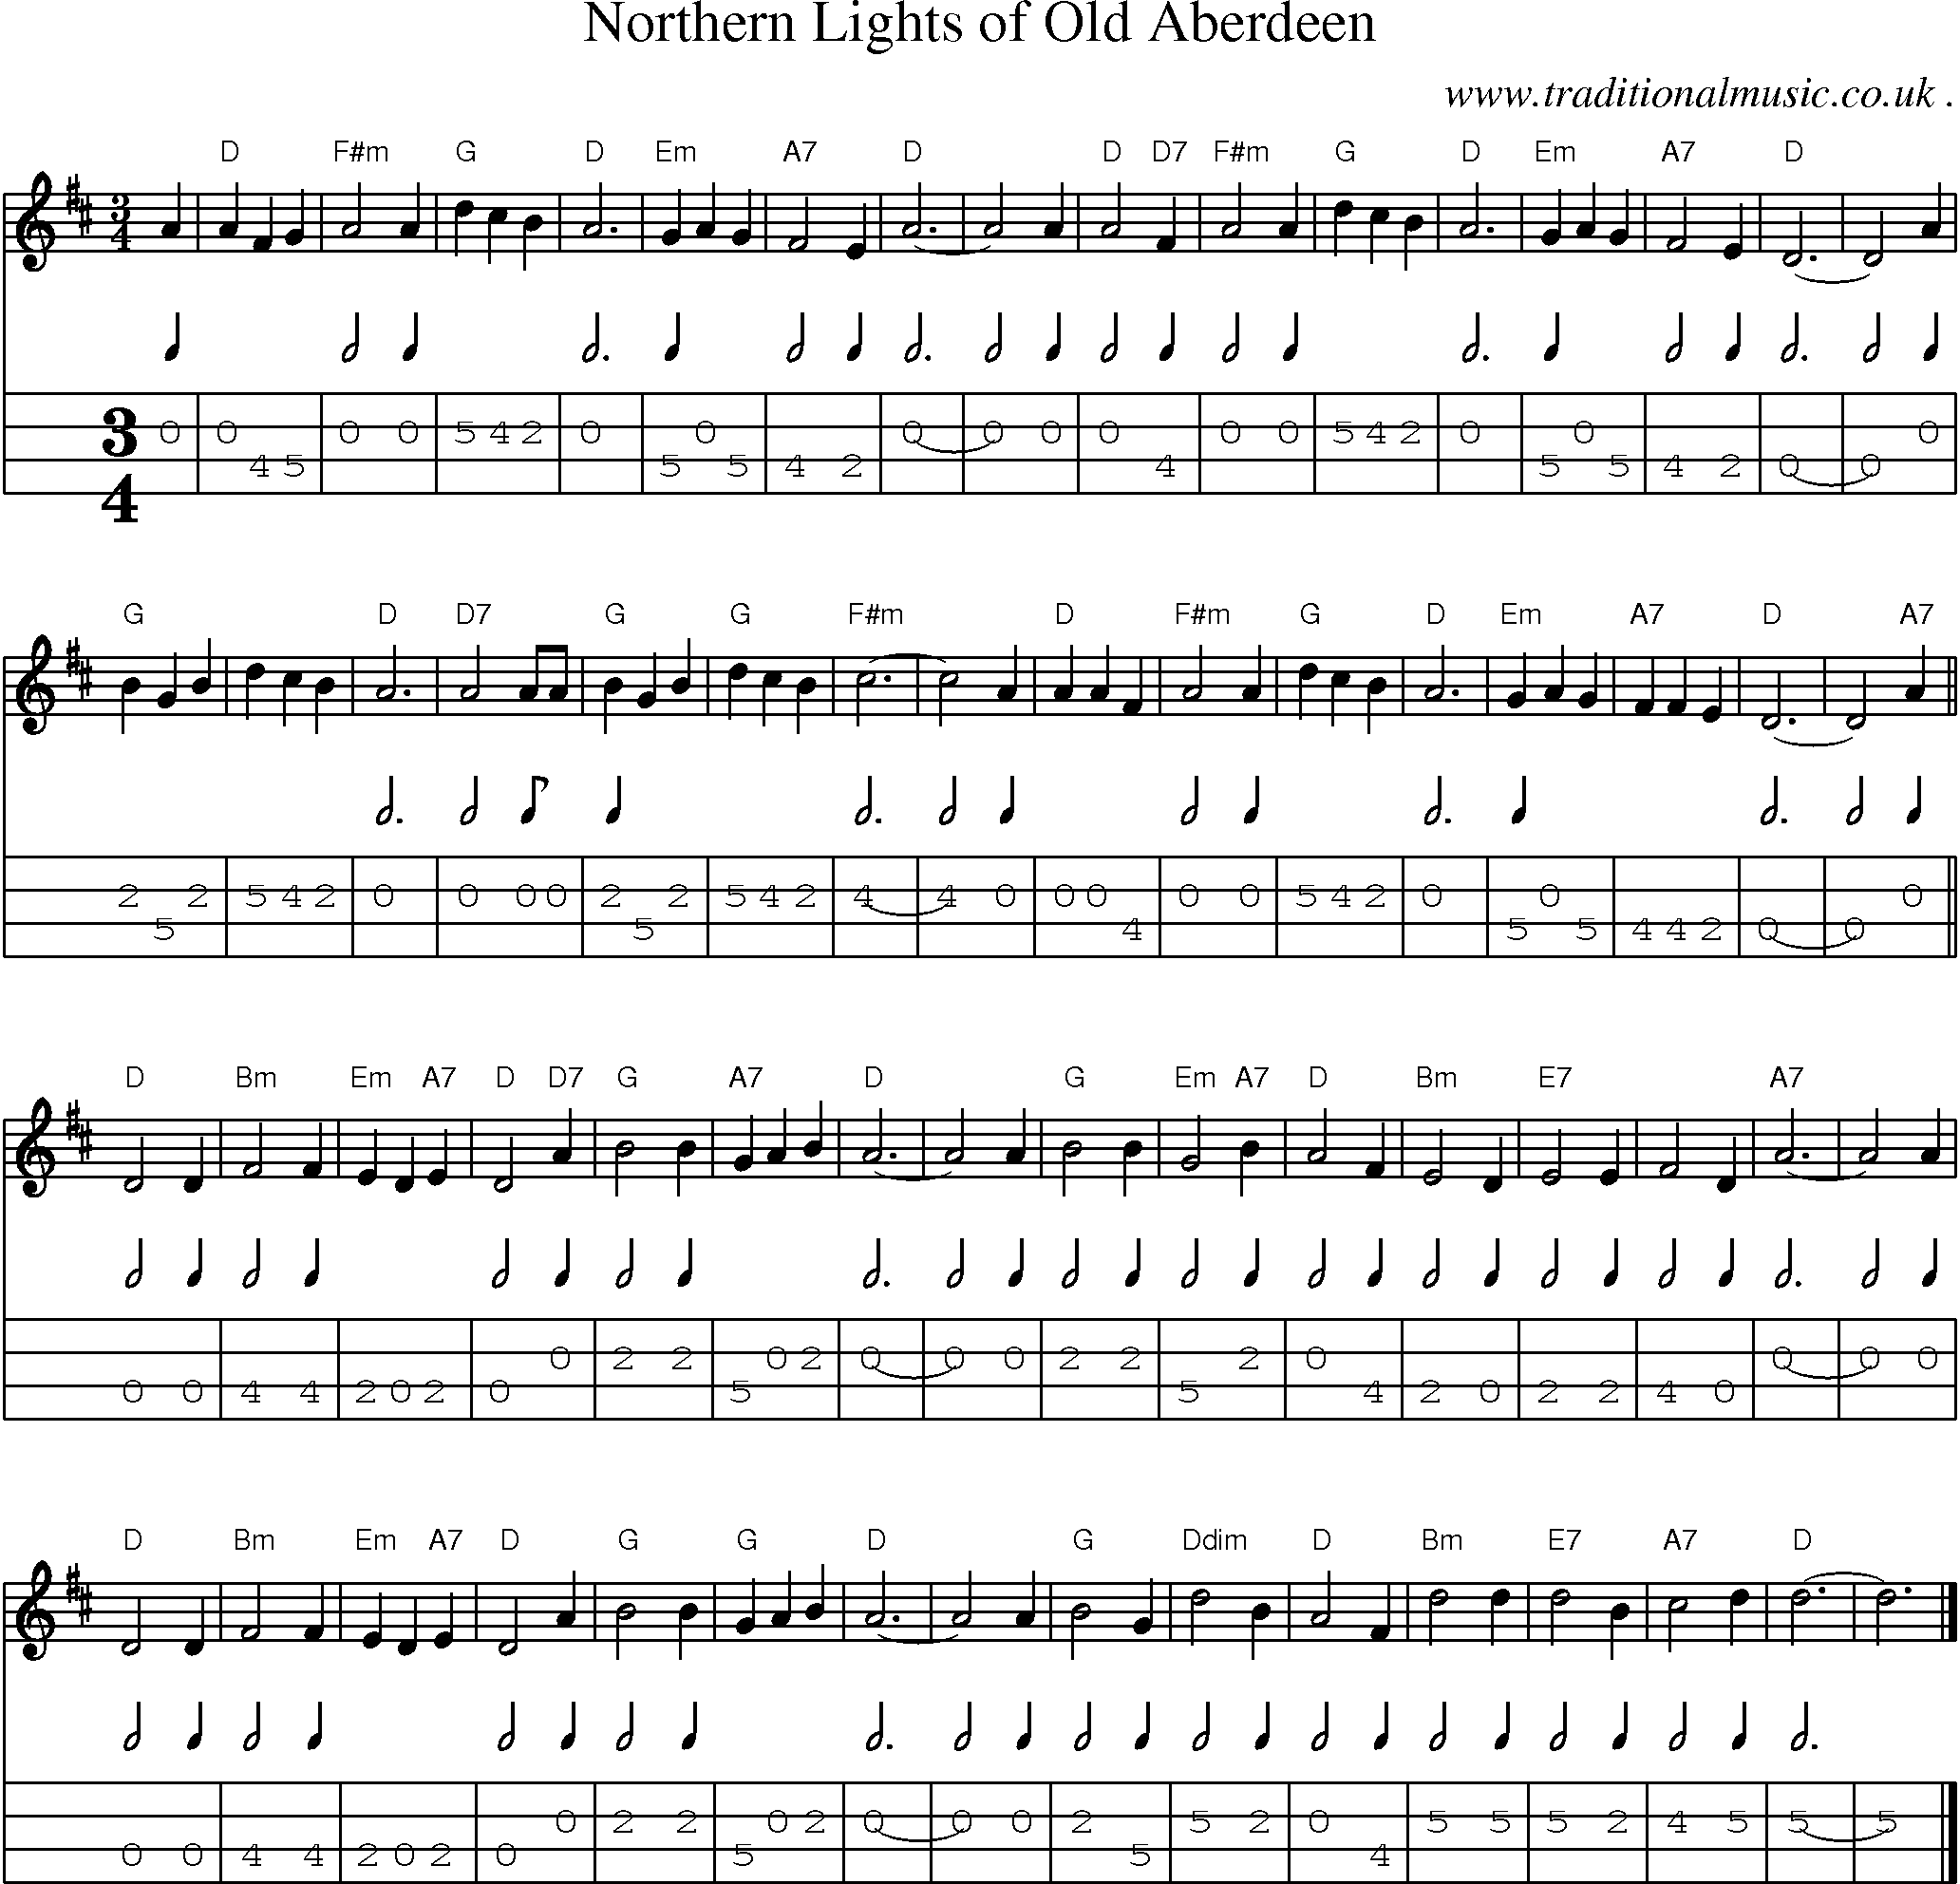 Music Score and Guitar Tabs for Northern Lights of Old Aberdeen